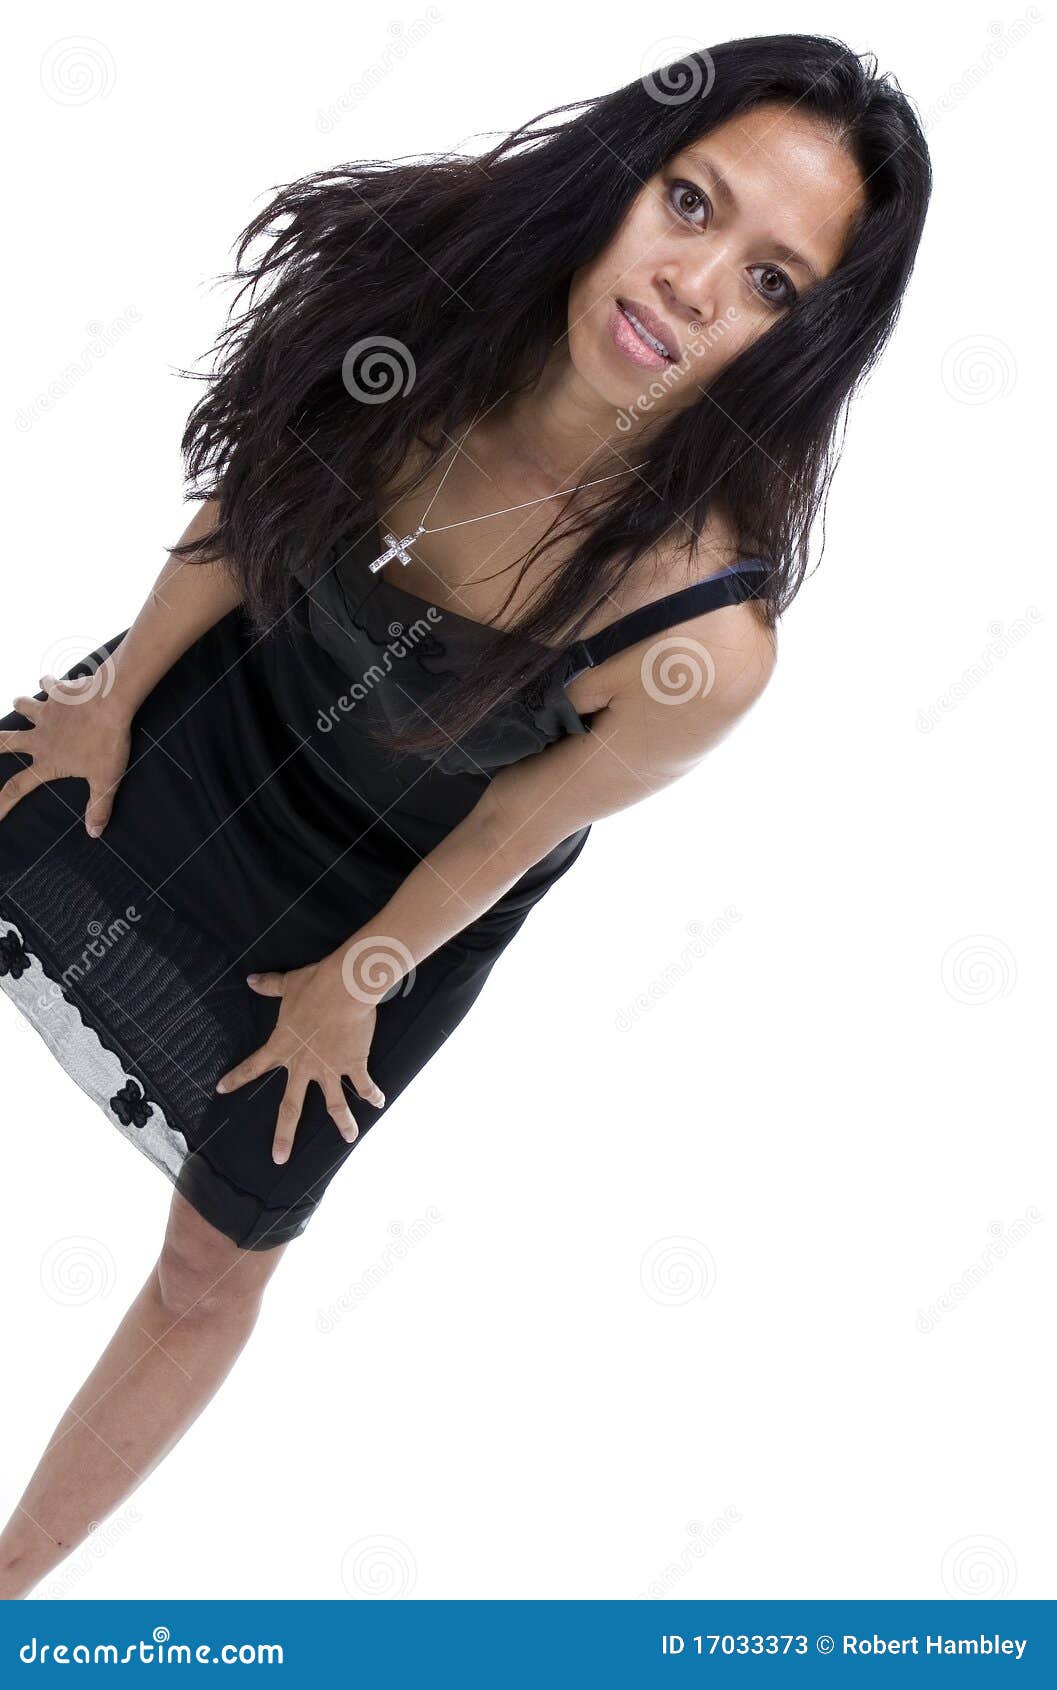 Brunette in Black Evening Dress Stock Image - Image of young, evening ...